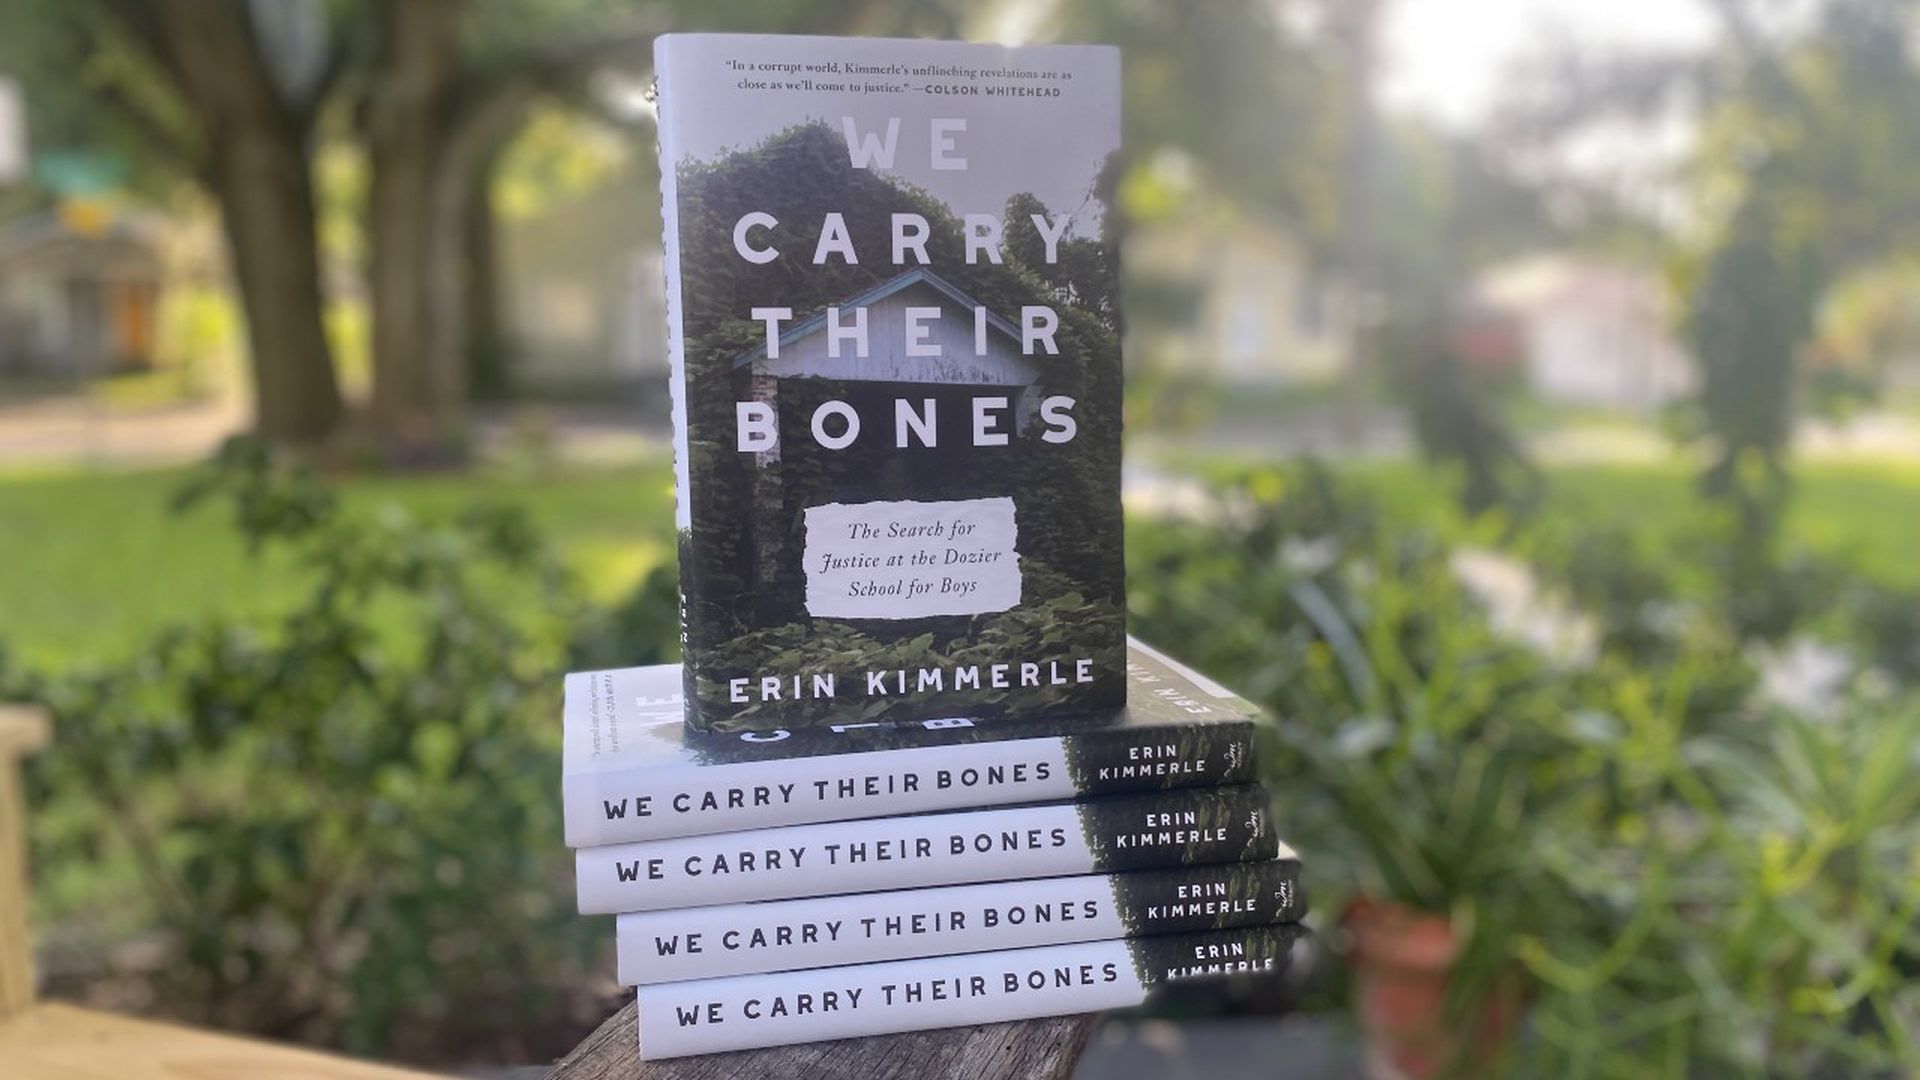 A photo of five "We Carry Their Bones" books stacked on top of each other.